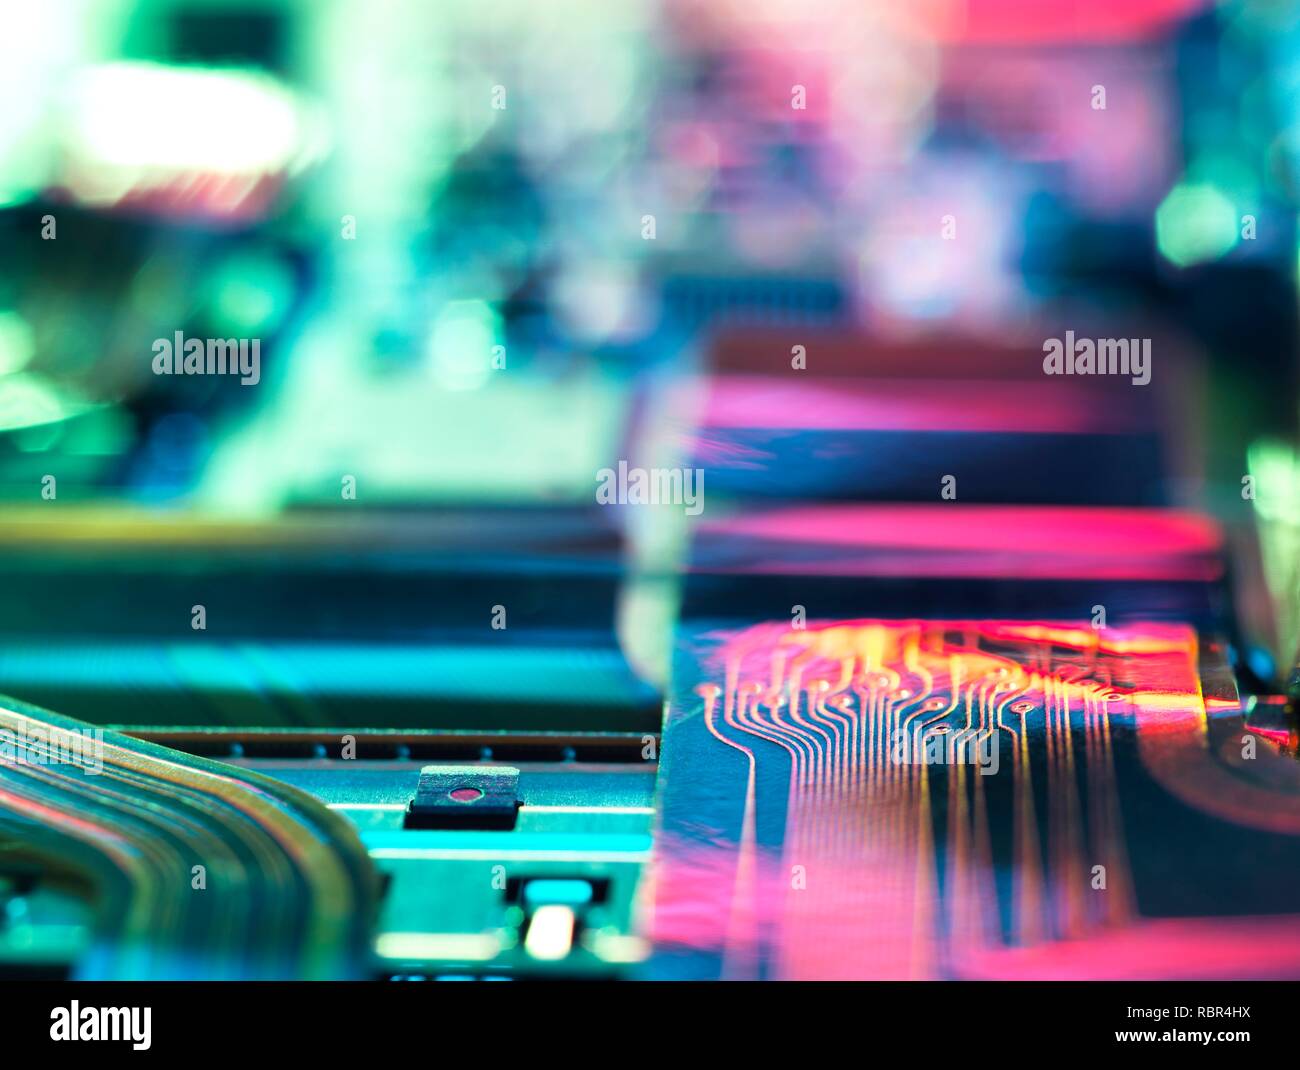 Electronic circuitry on a laptop computer. Stock Photo